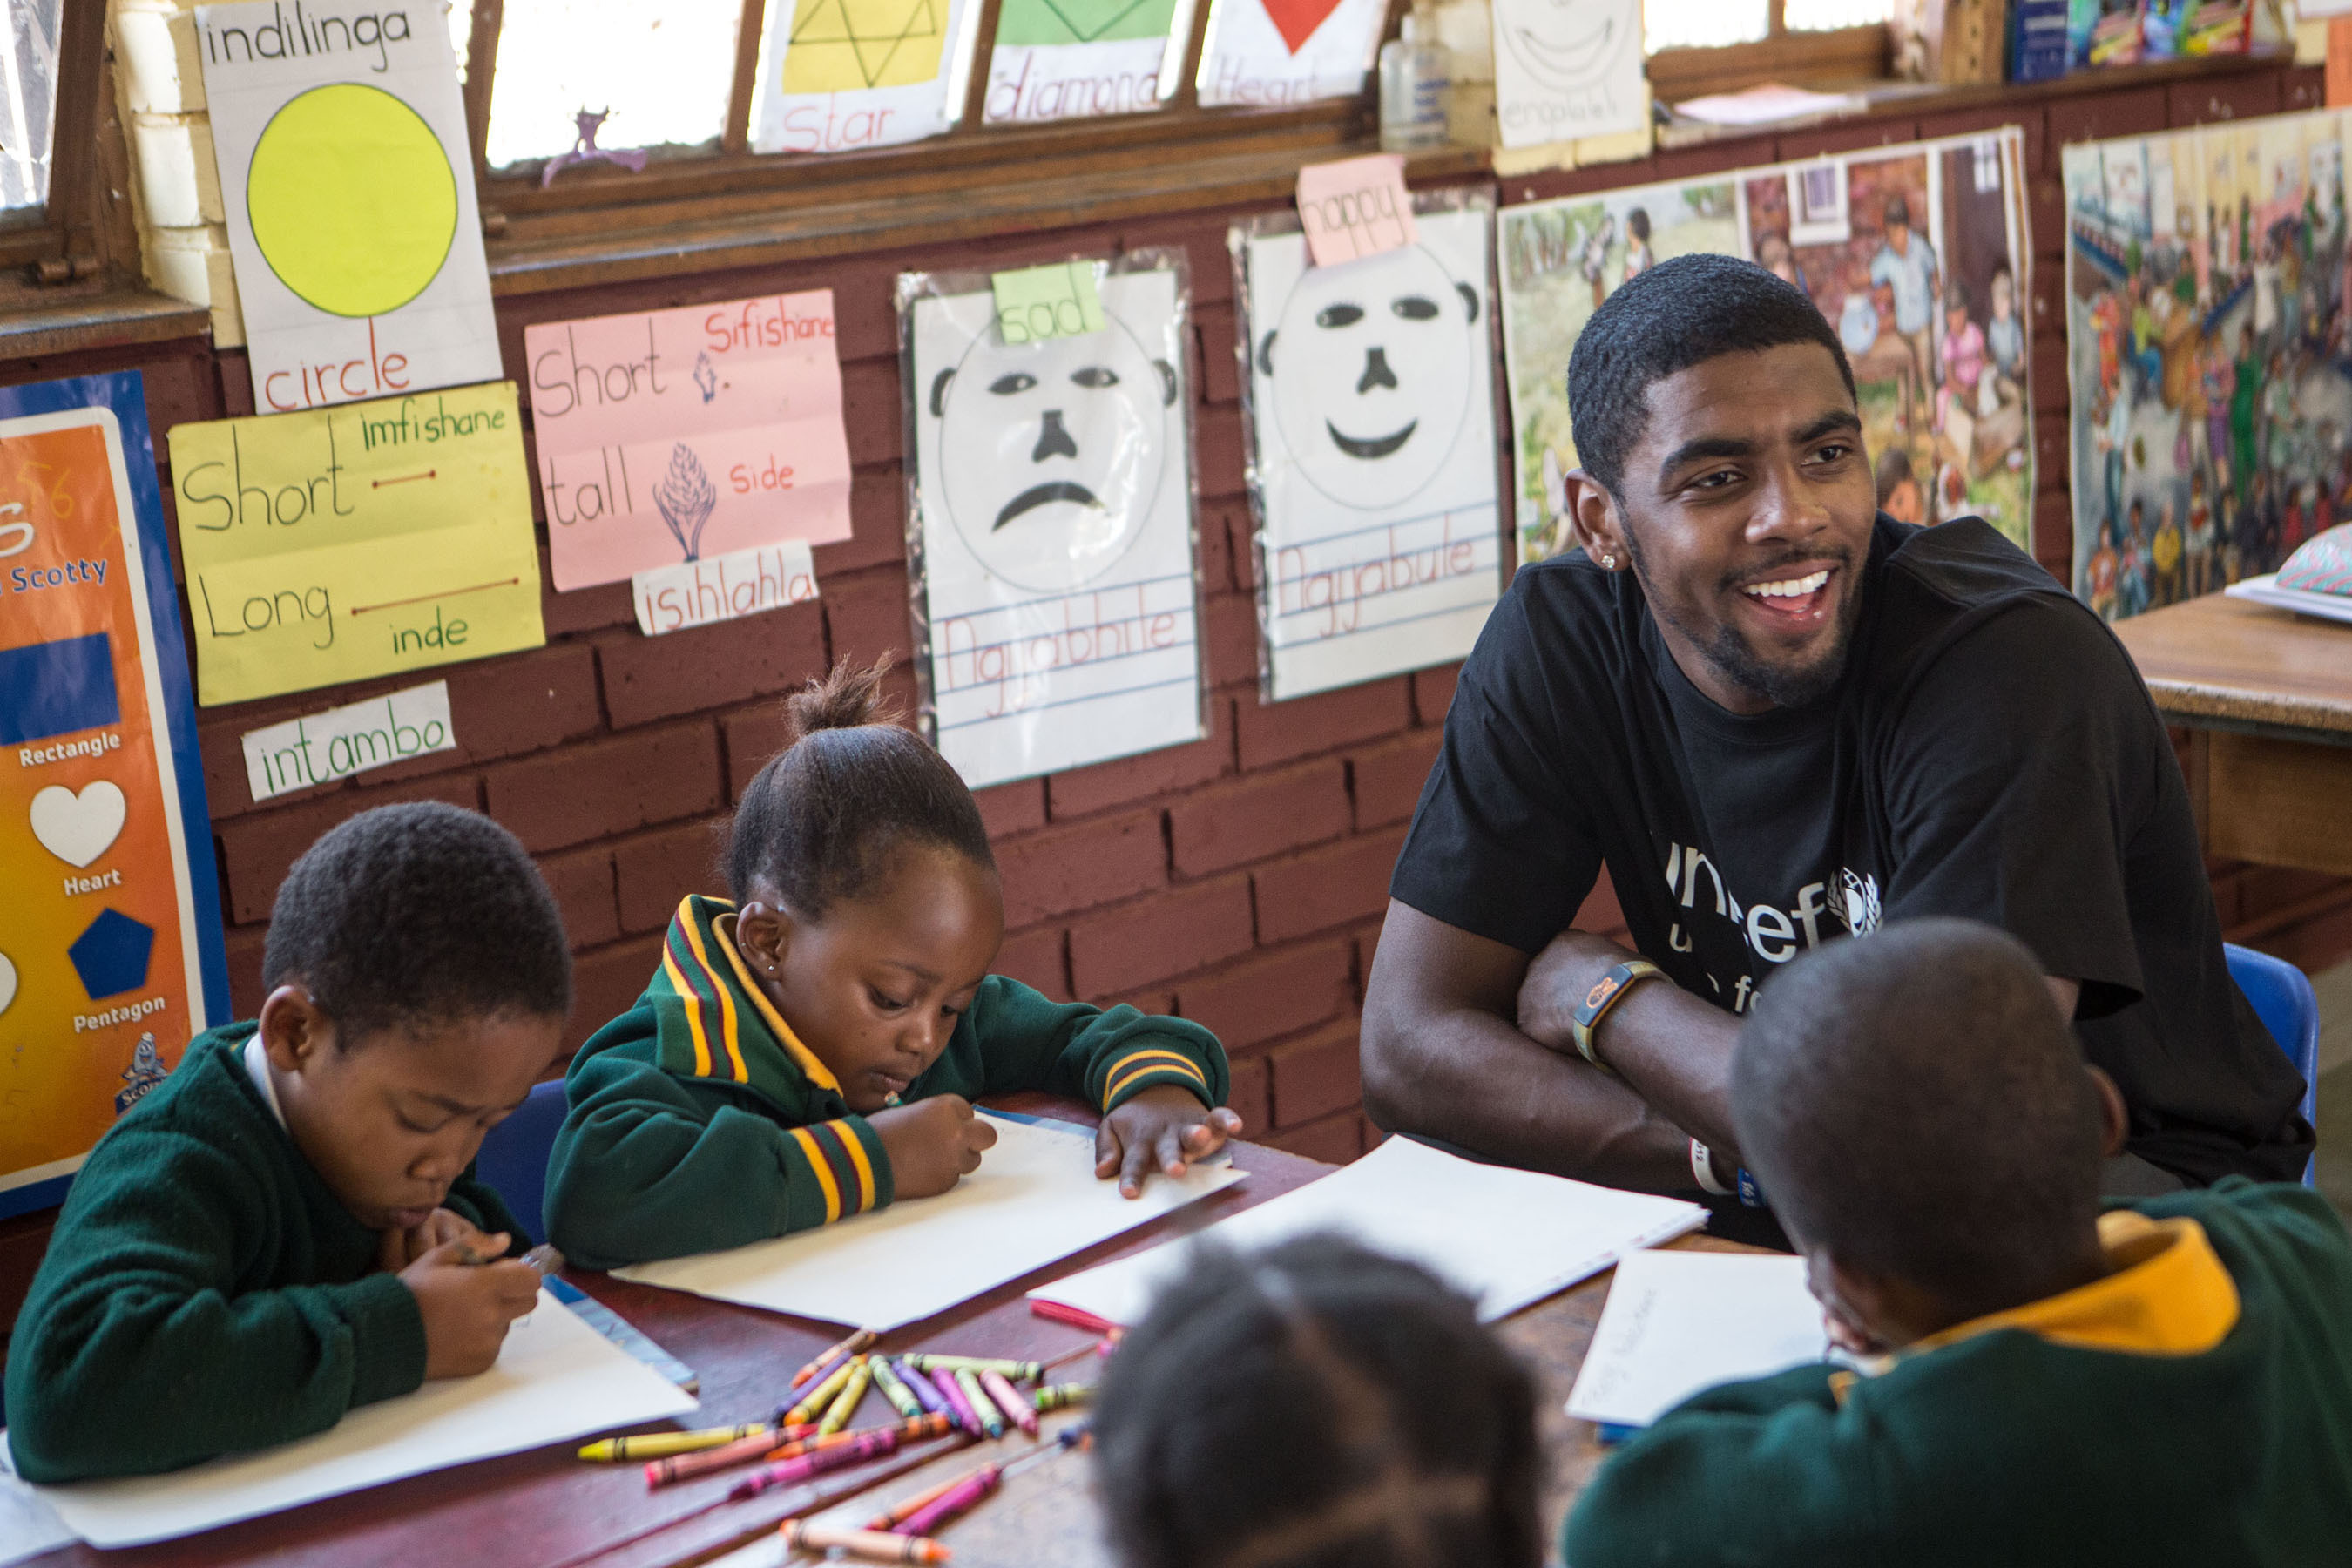 NBA All-Star Kyrie Irving Visits Schools in South Africa with UNICEF